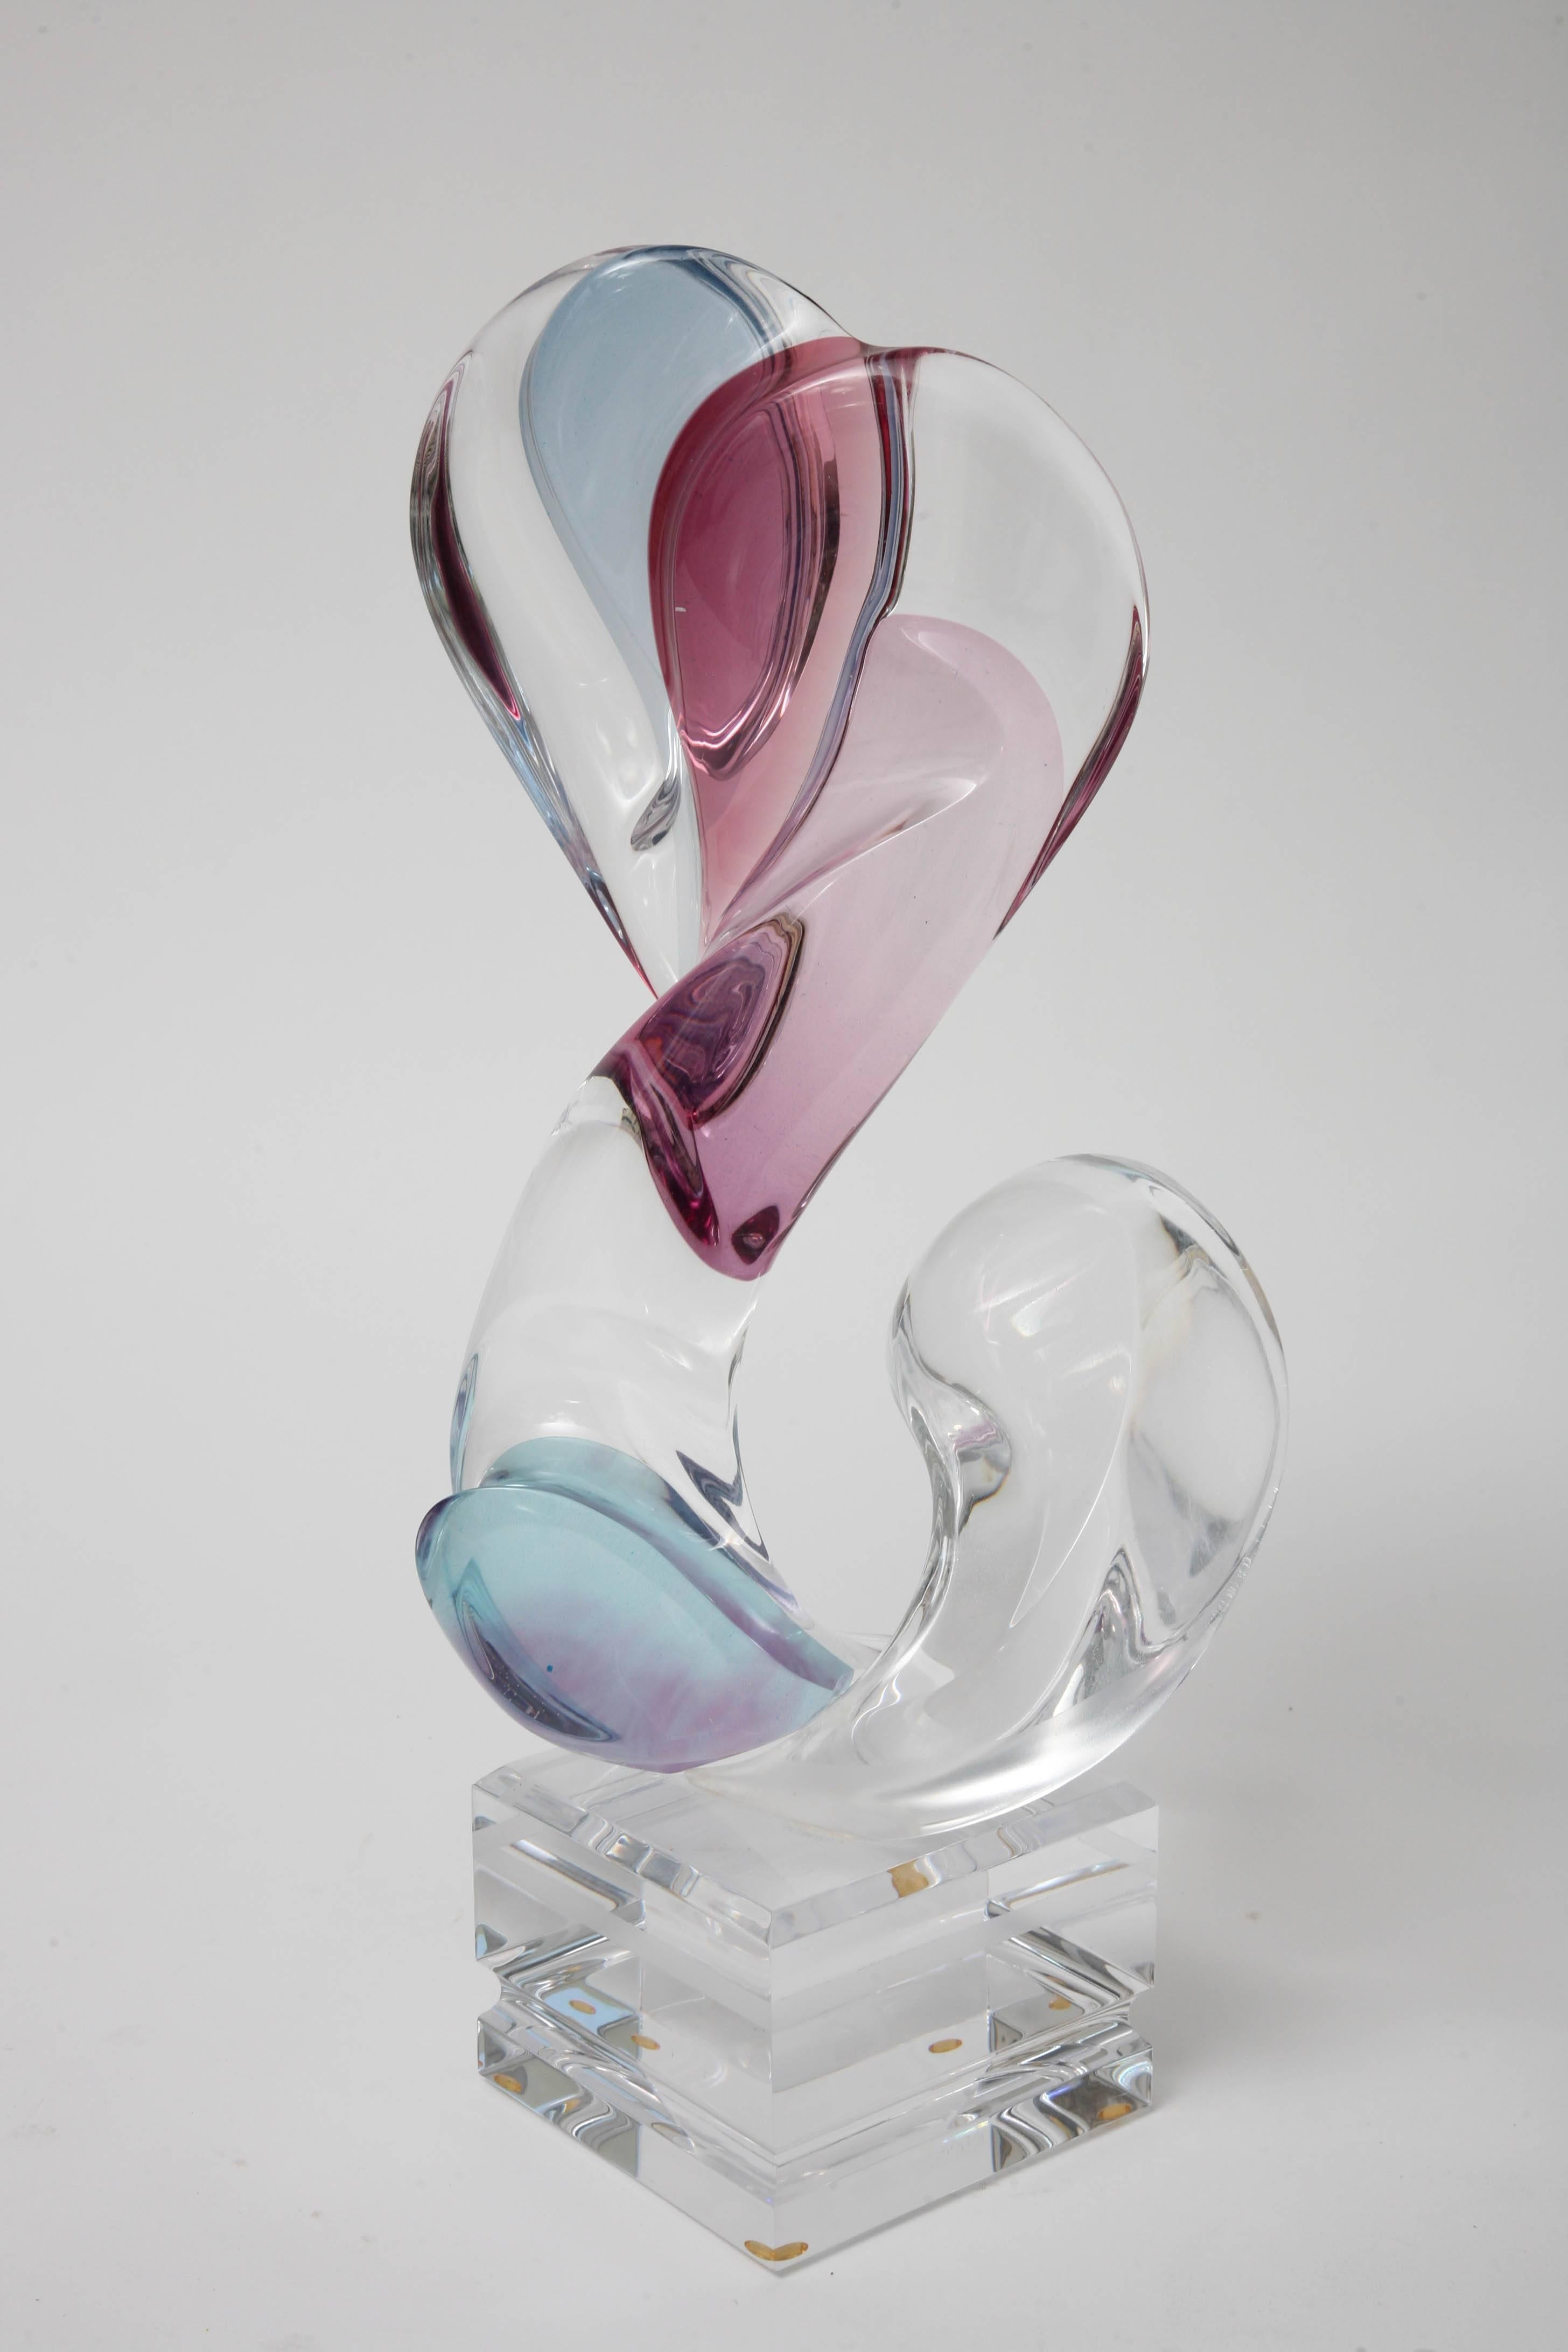 Modern Multi-Colored Lucite Figural Sculpture of Two Lovers Embracing by Michael Bene